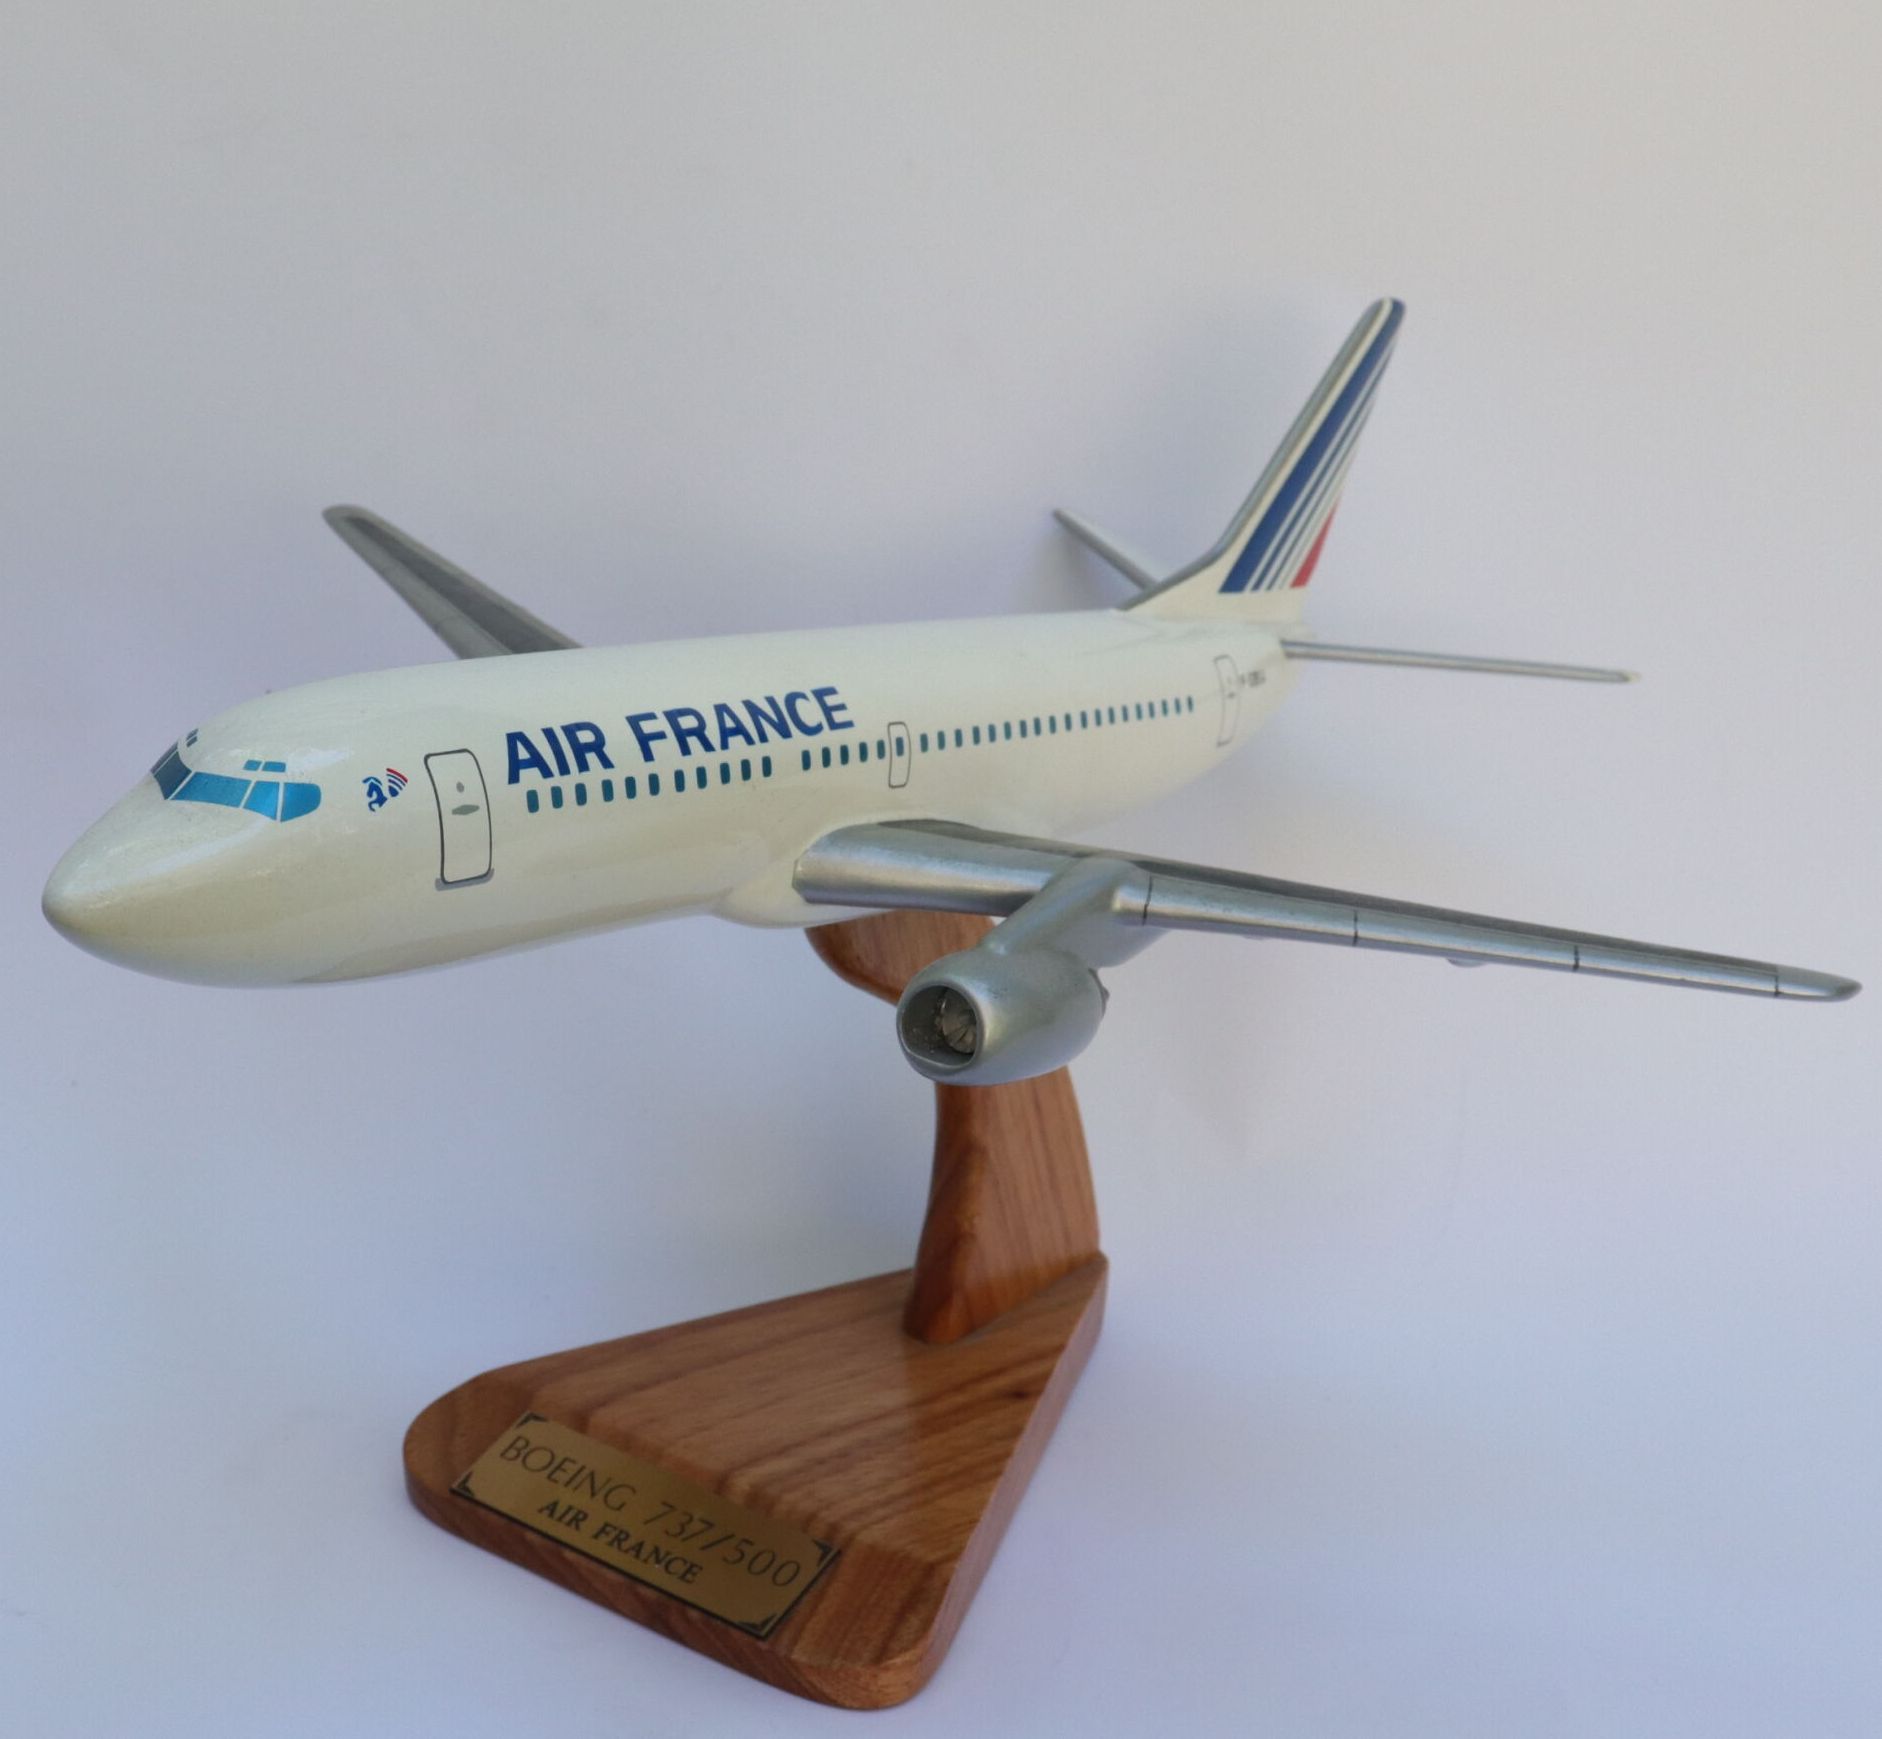 Null BOEING B-737-500 AIR FRANCE.

Contemporary painted wooden model of the airc&hellip;